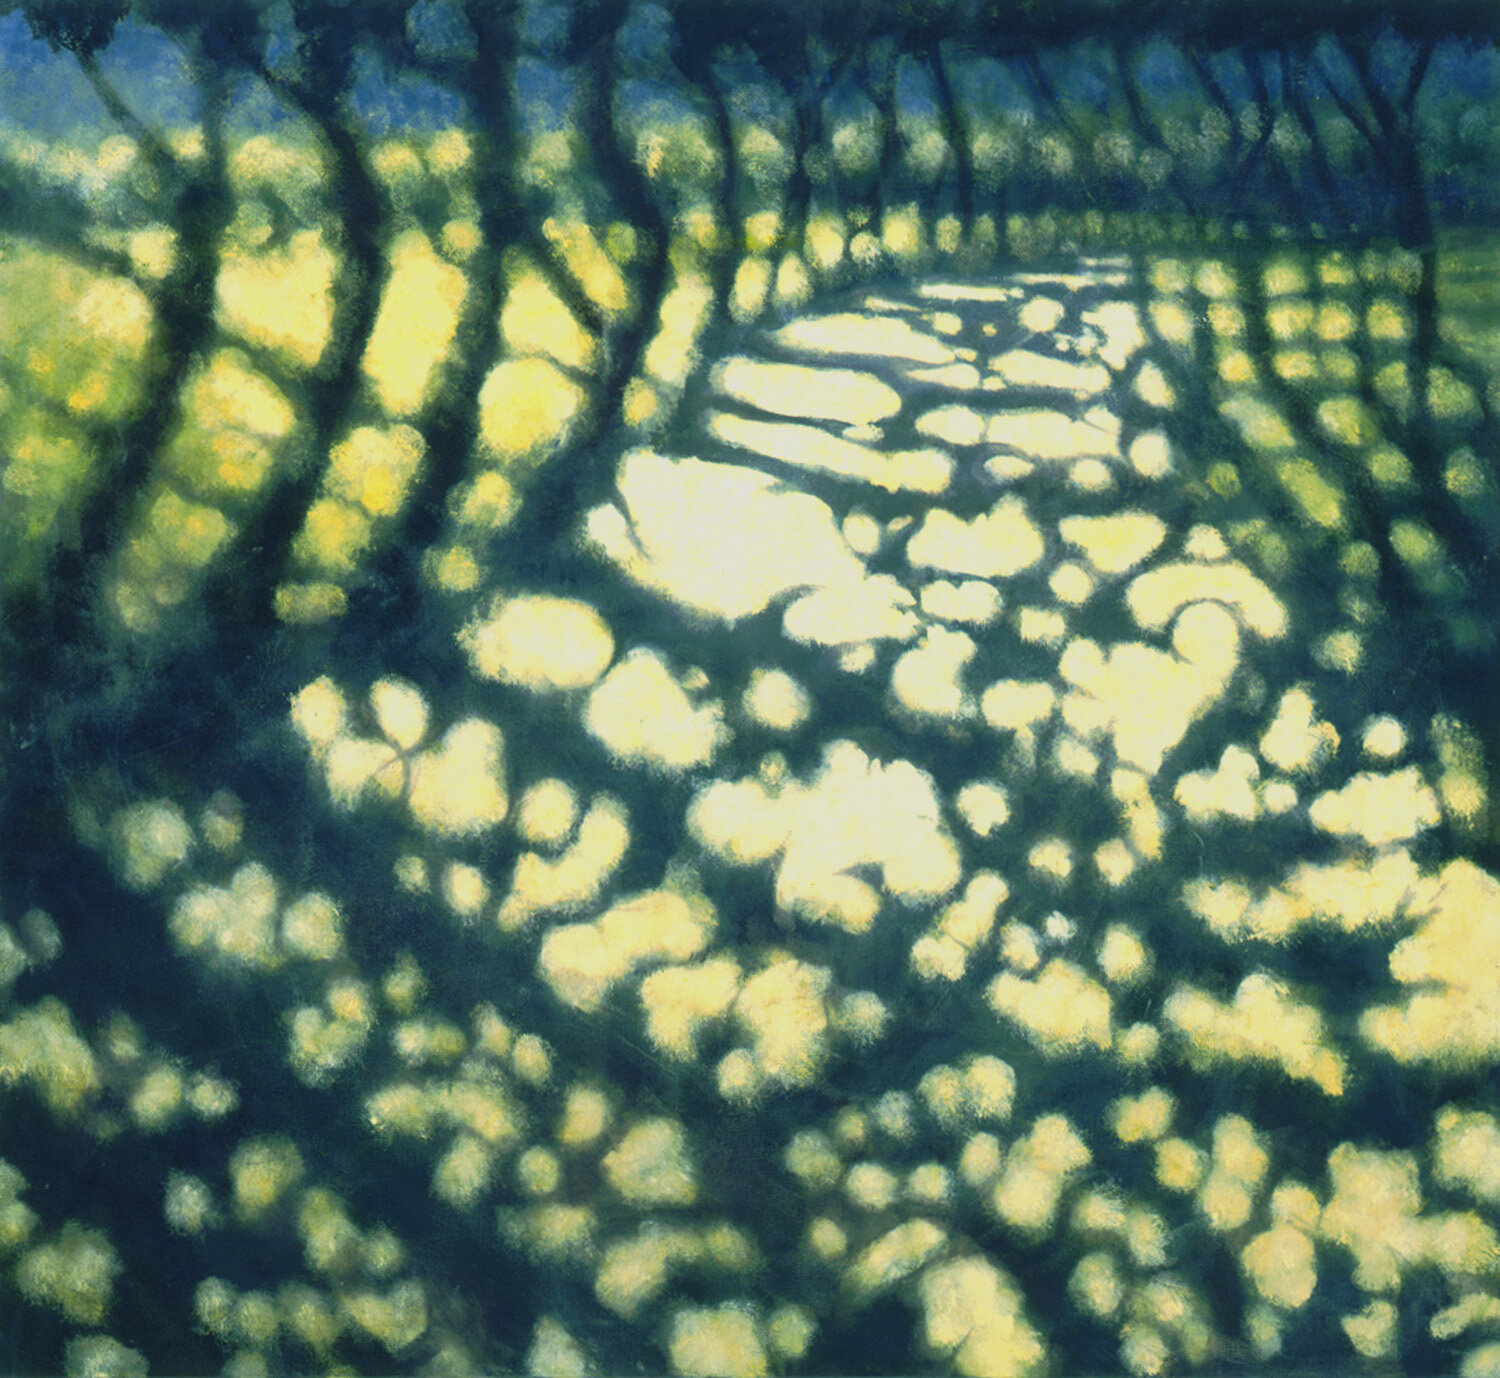 Road with Shadows 1 (1998)